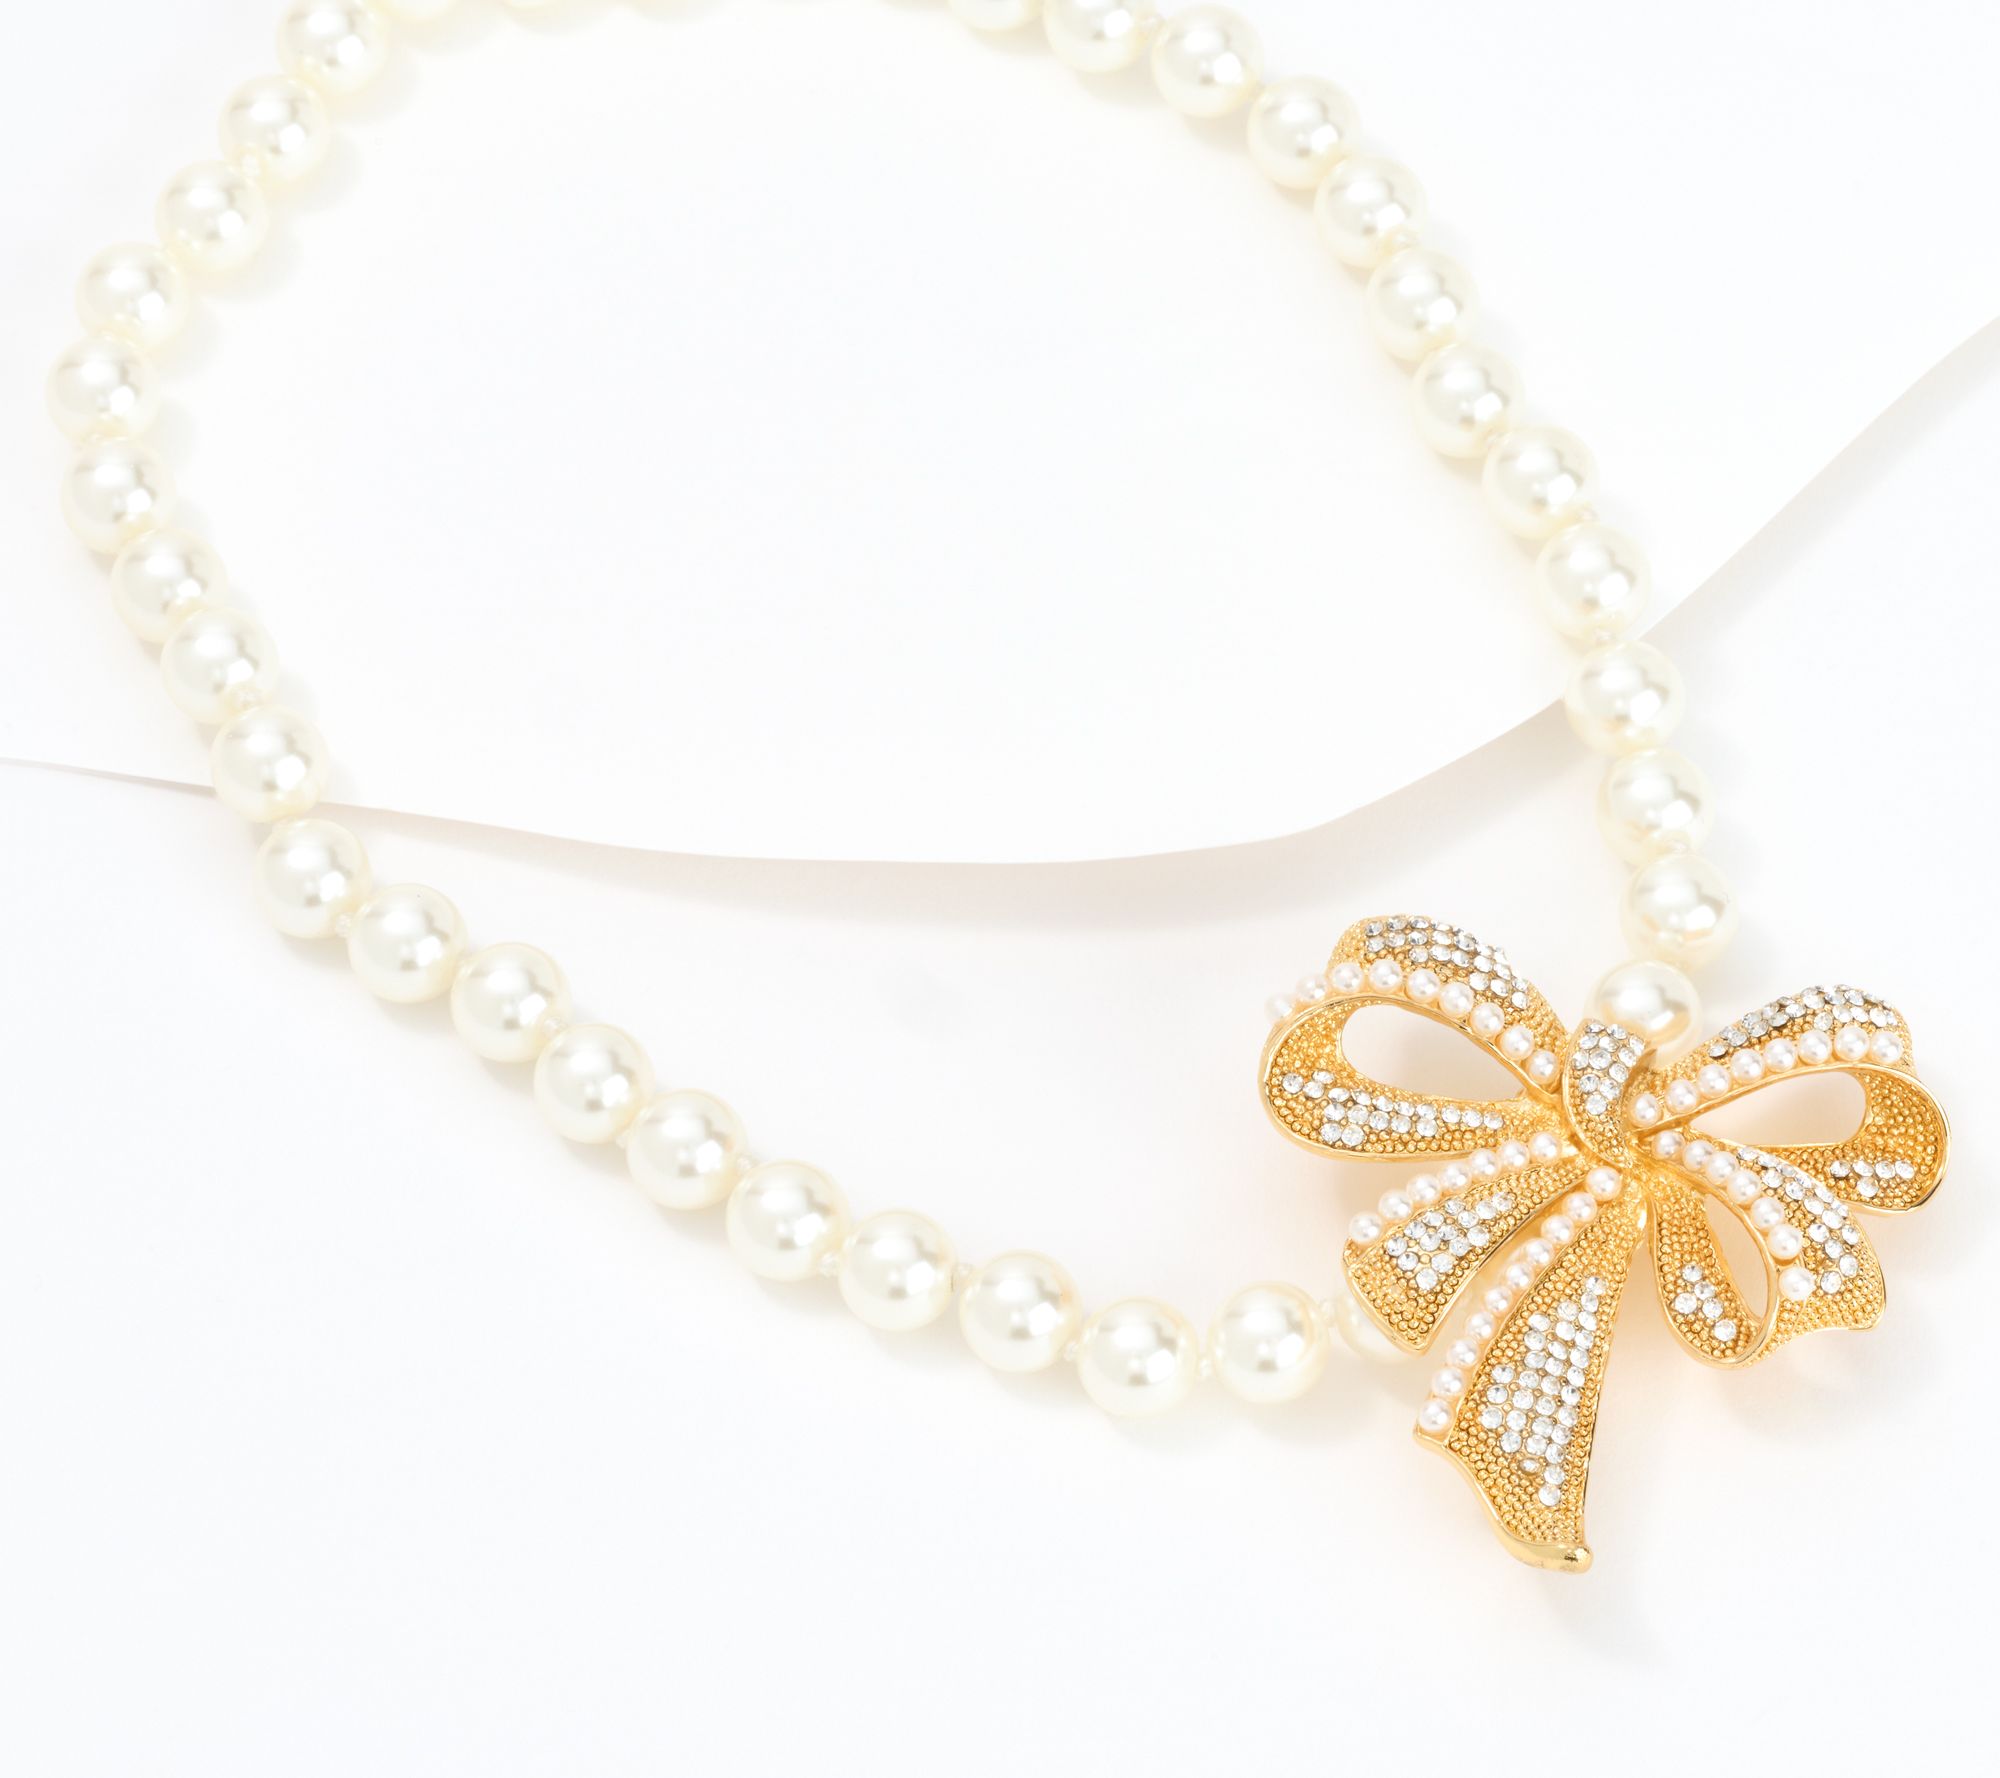 WEAR ME KNOT! pearl and bow detailed necklace